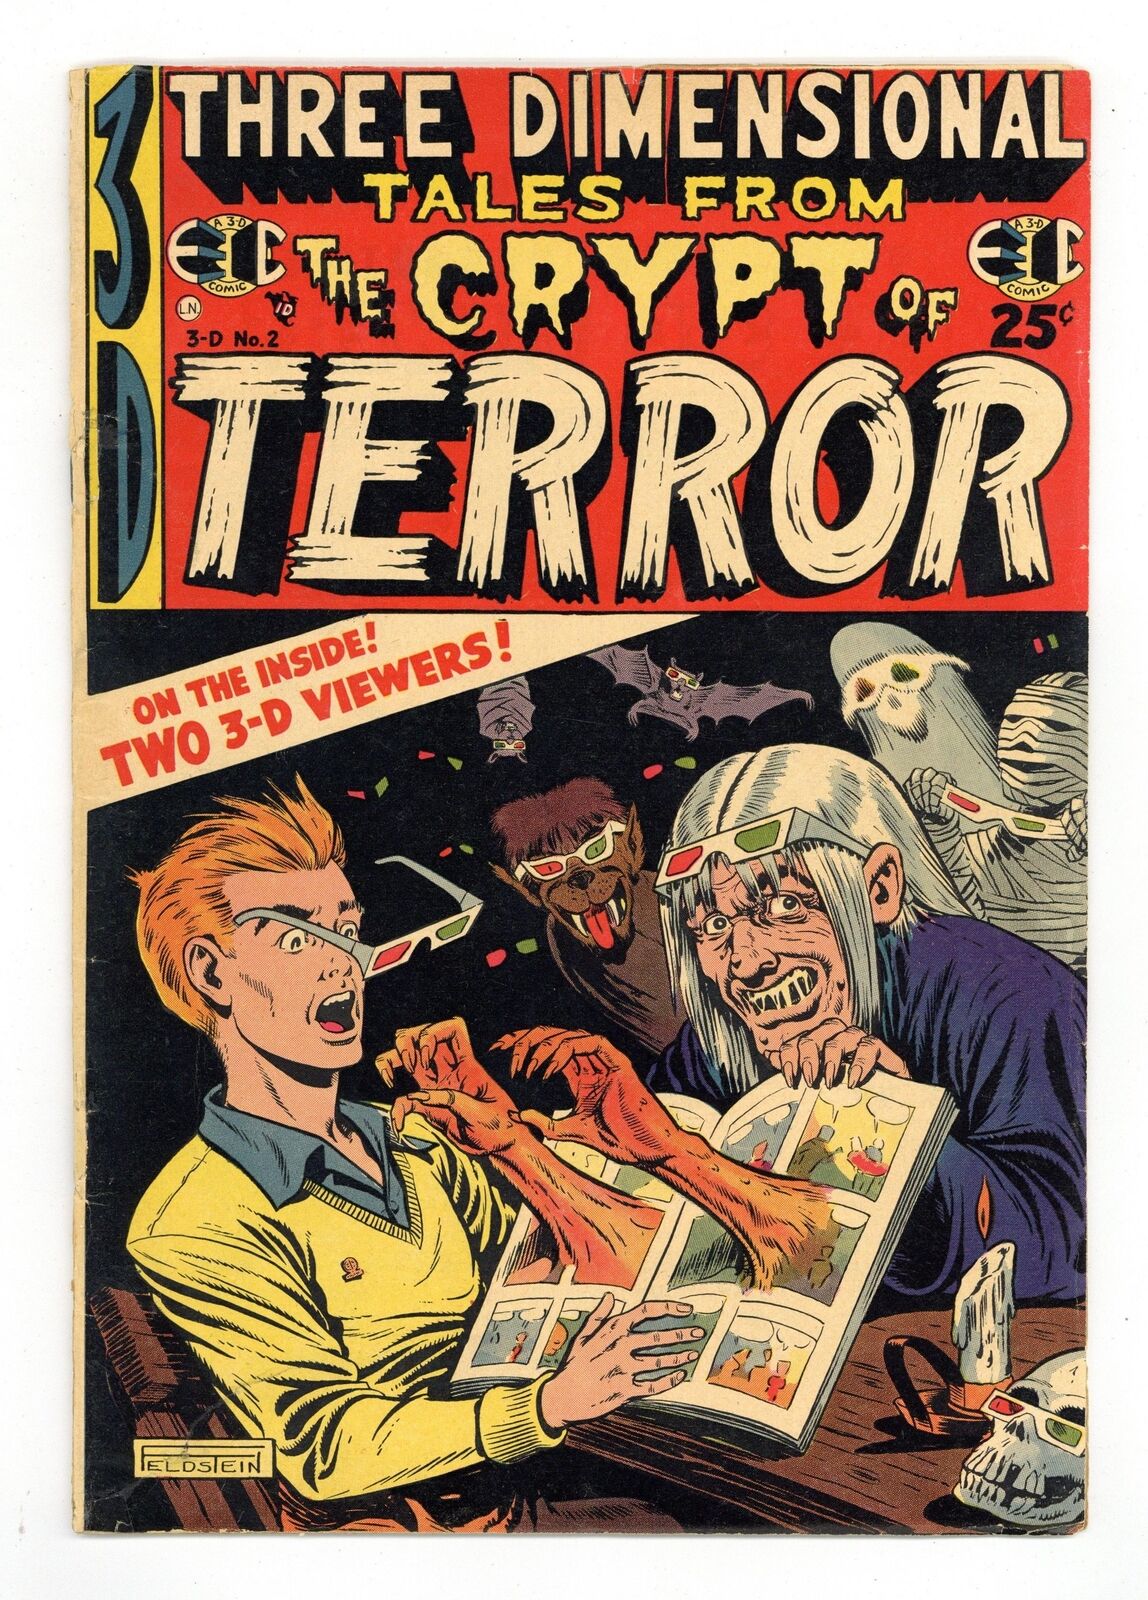 Three Dimensional Tales from the Crypt #2 GD+ 2.5 RESTORED 1954